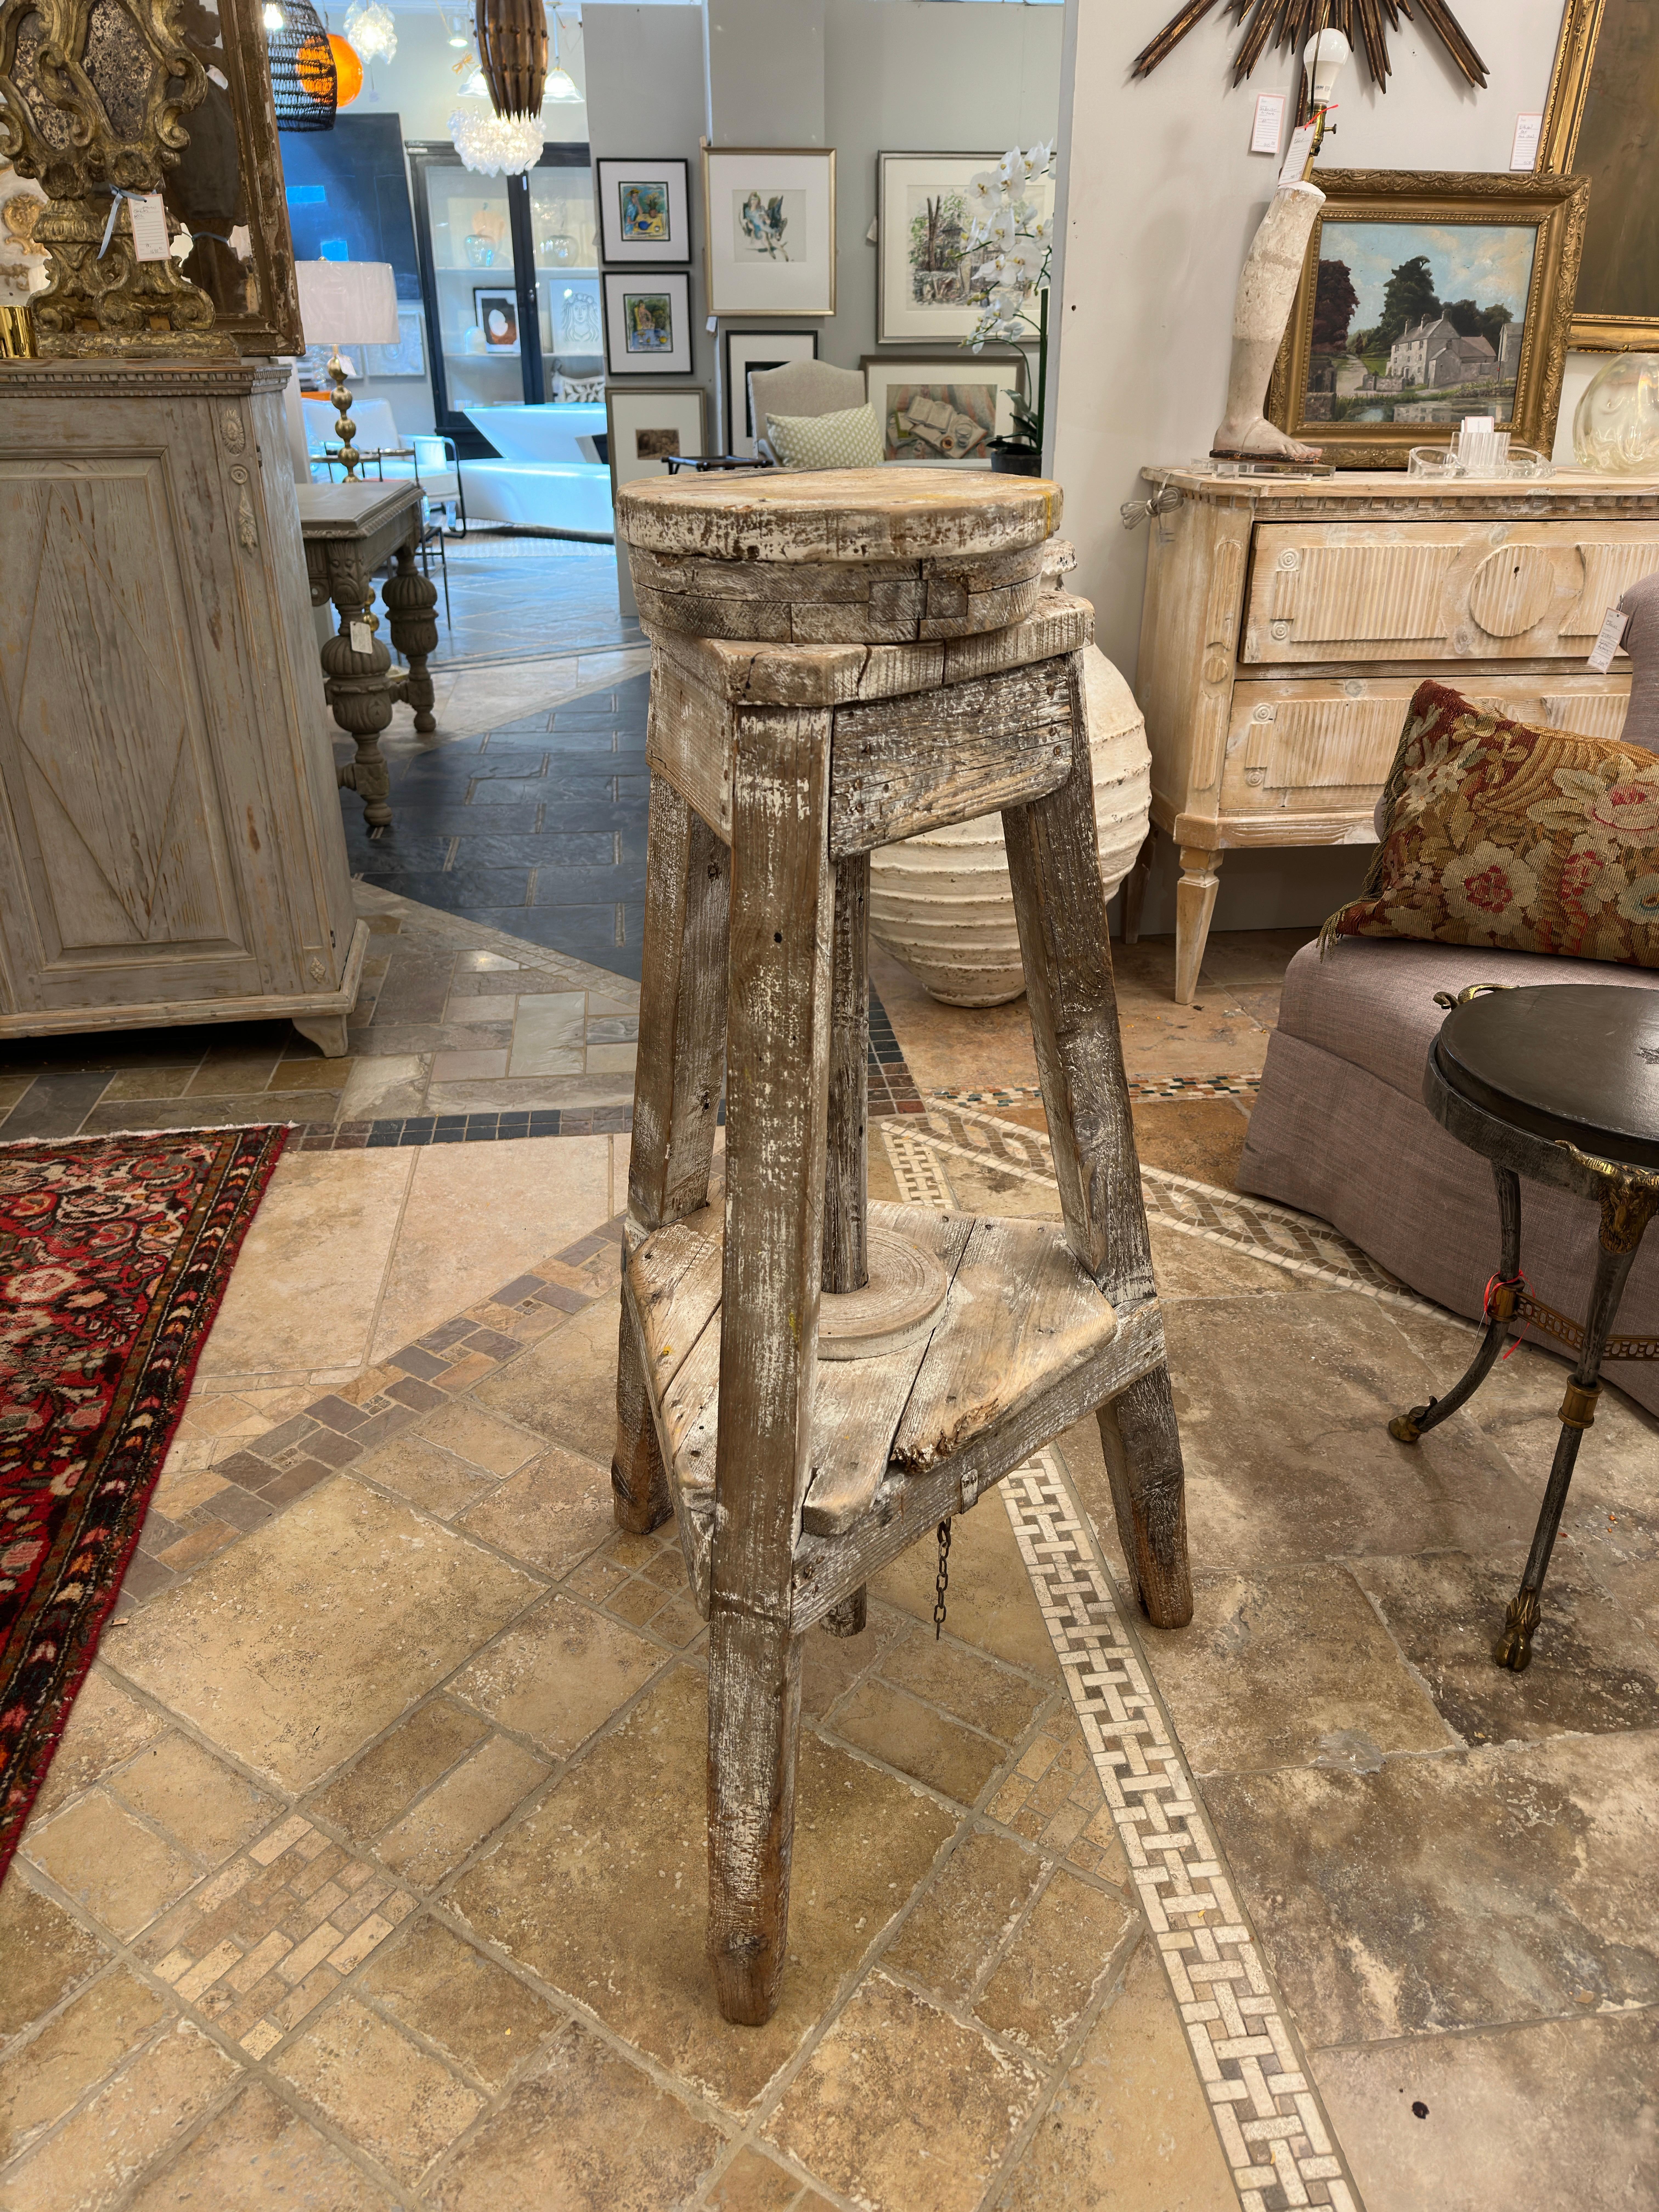 The 19th-century French sculptor's stand exudes an aura of artistic history and practicality. Crafted with meticulous attention to detail, its three legs provide stability while allowing for mobility, essential for a sculptor navigating around their